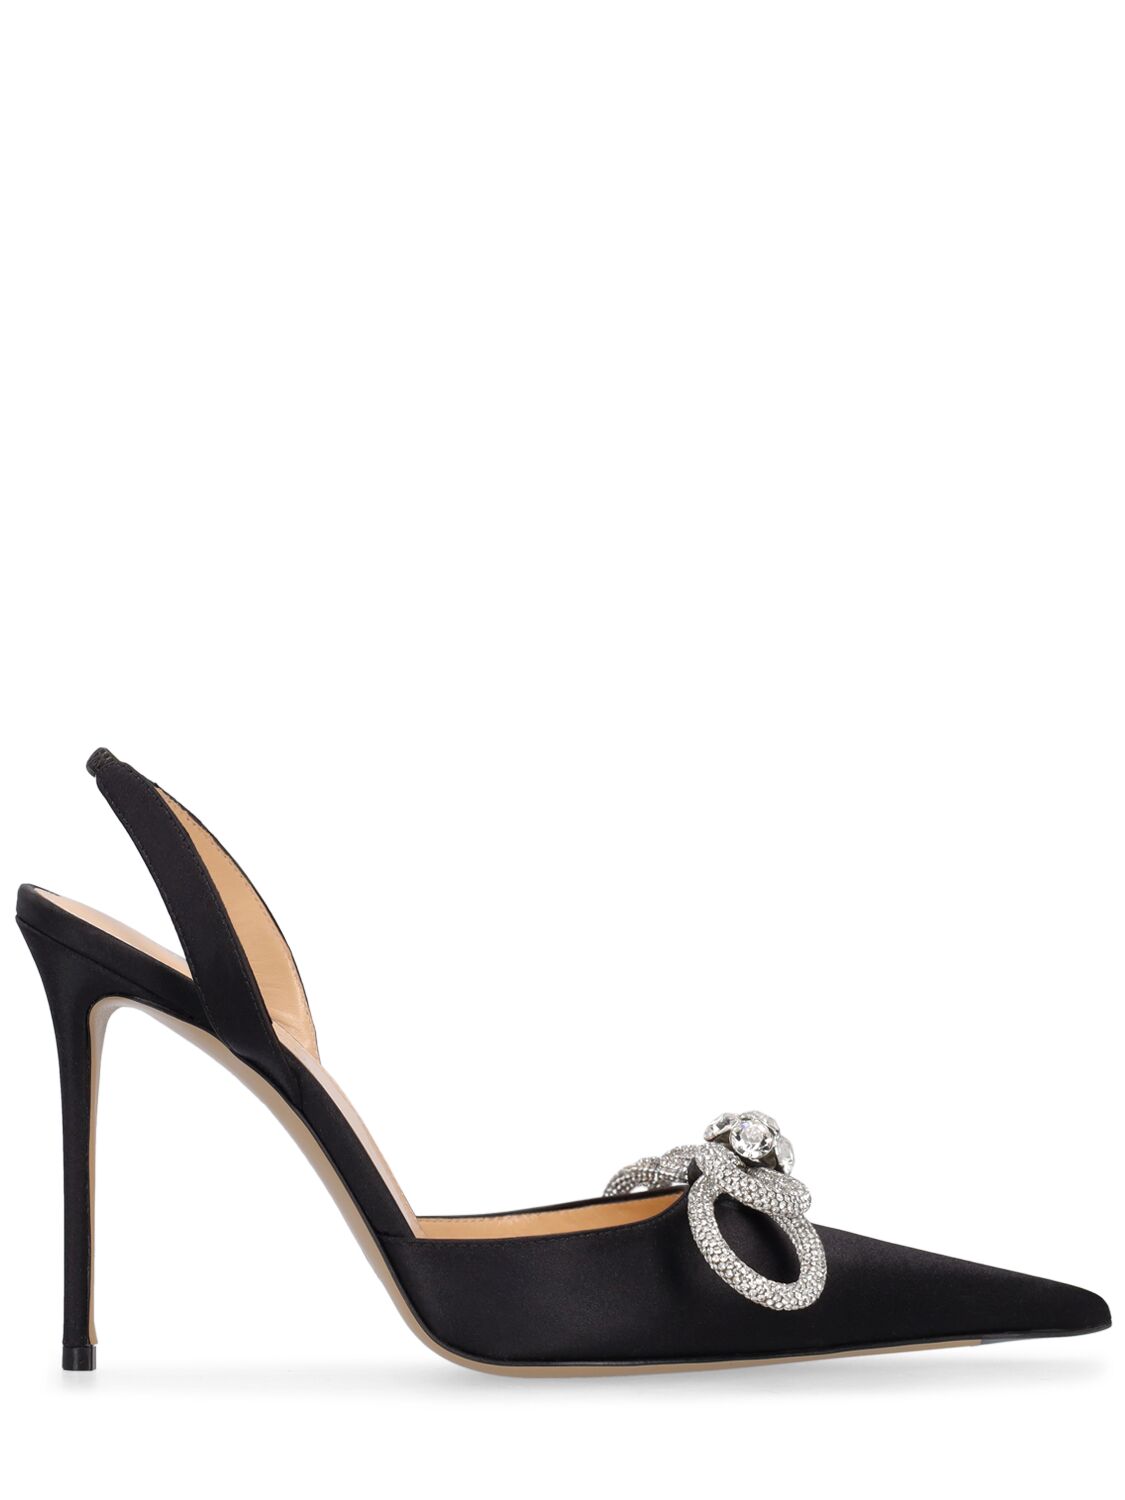 Image of 110mm Double Bow Satin Slingback Pumps